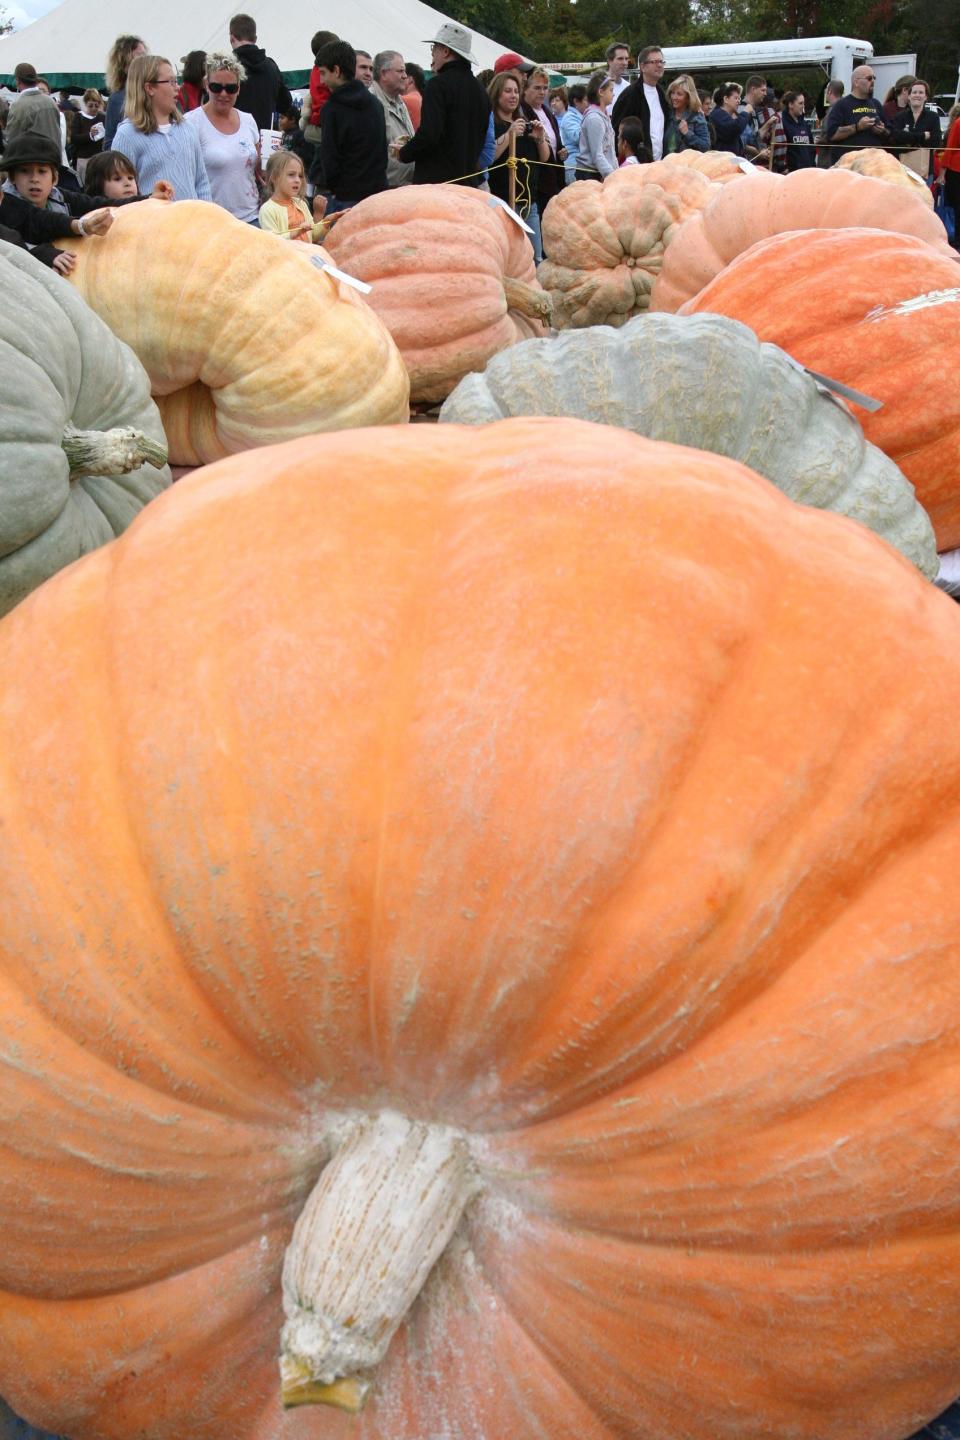 2009: Giant pumpkins waiting for the weigh-in at The Southern New England Giant Pumpkin Growers' Annual Weigh-Off, held at Frerichs Farm in Warren.